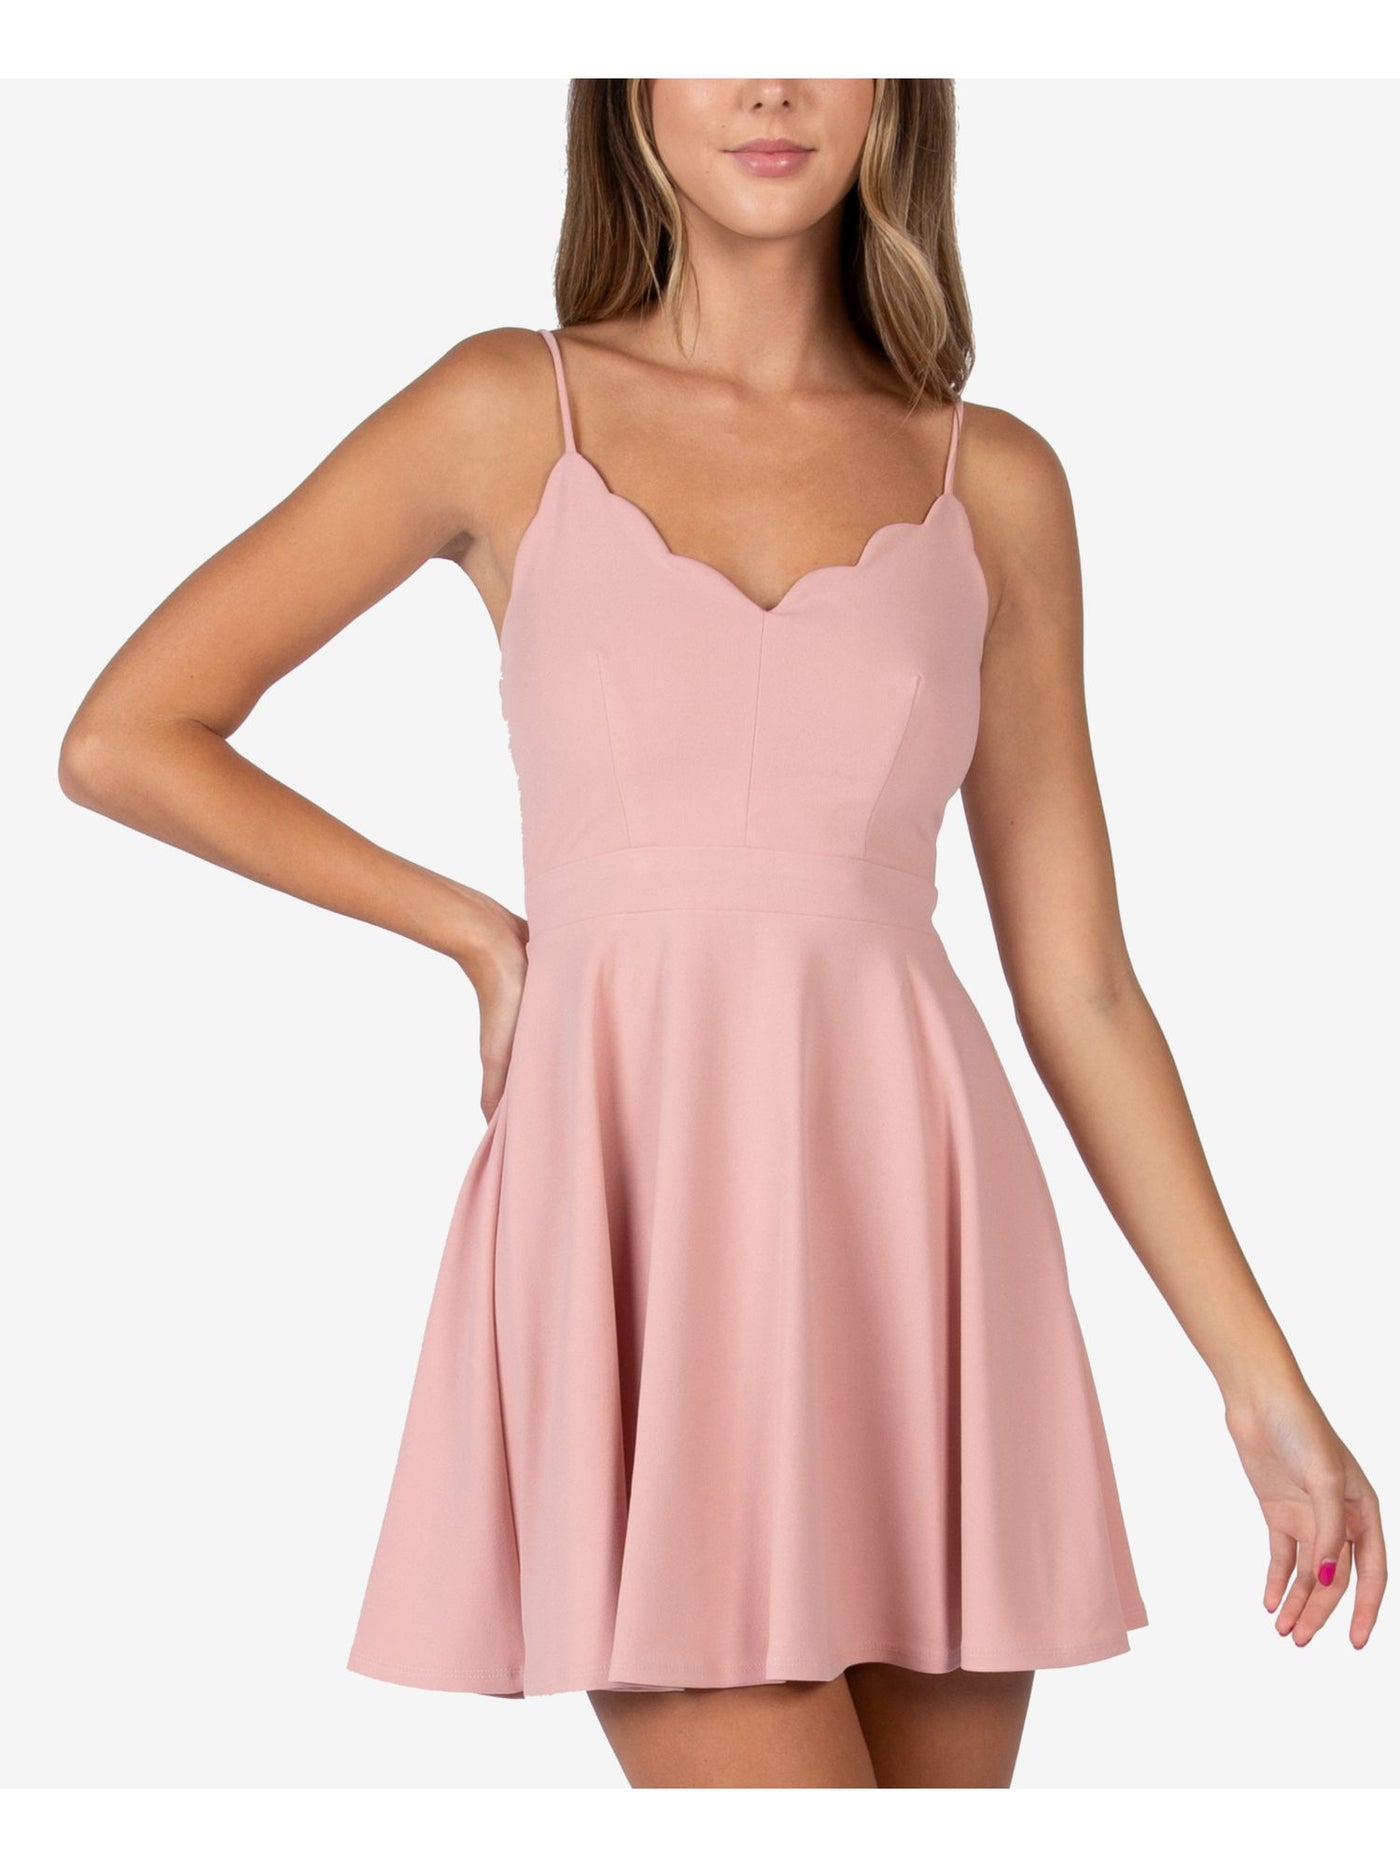 B DARLIN Womens Pink Stretch Zippered Fitted Scalloped Detail Spaghetti Strap V Neck Mini Evening Fit + Flare Dress Juniors 9\10